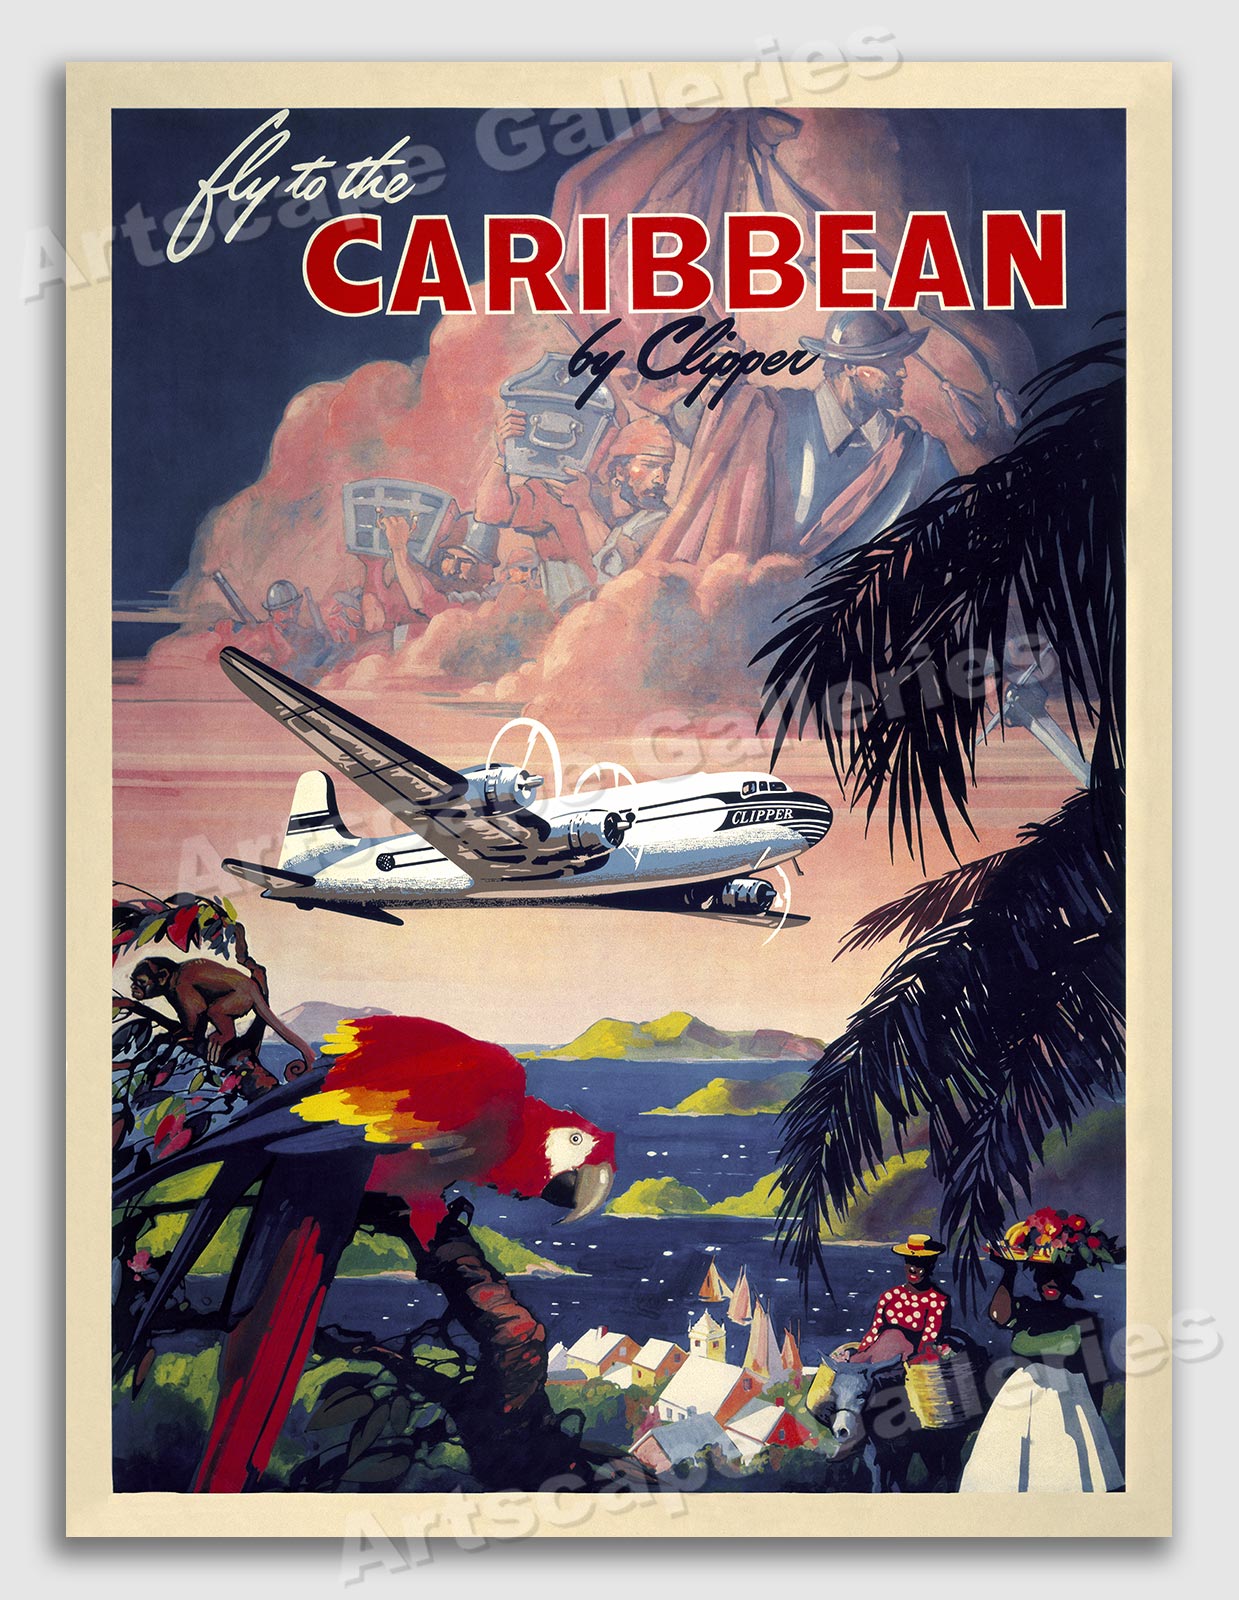 1940s travel posters